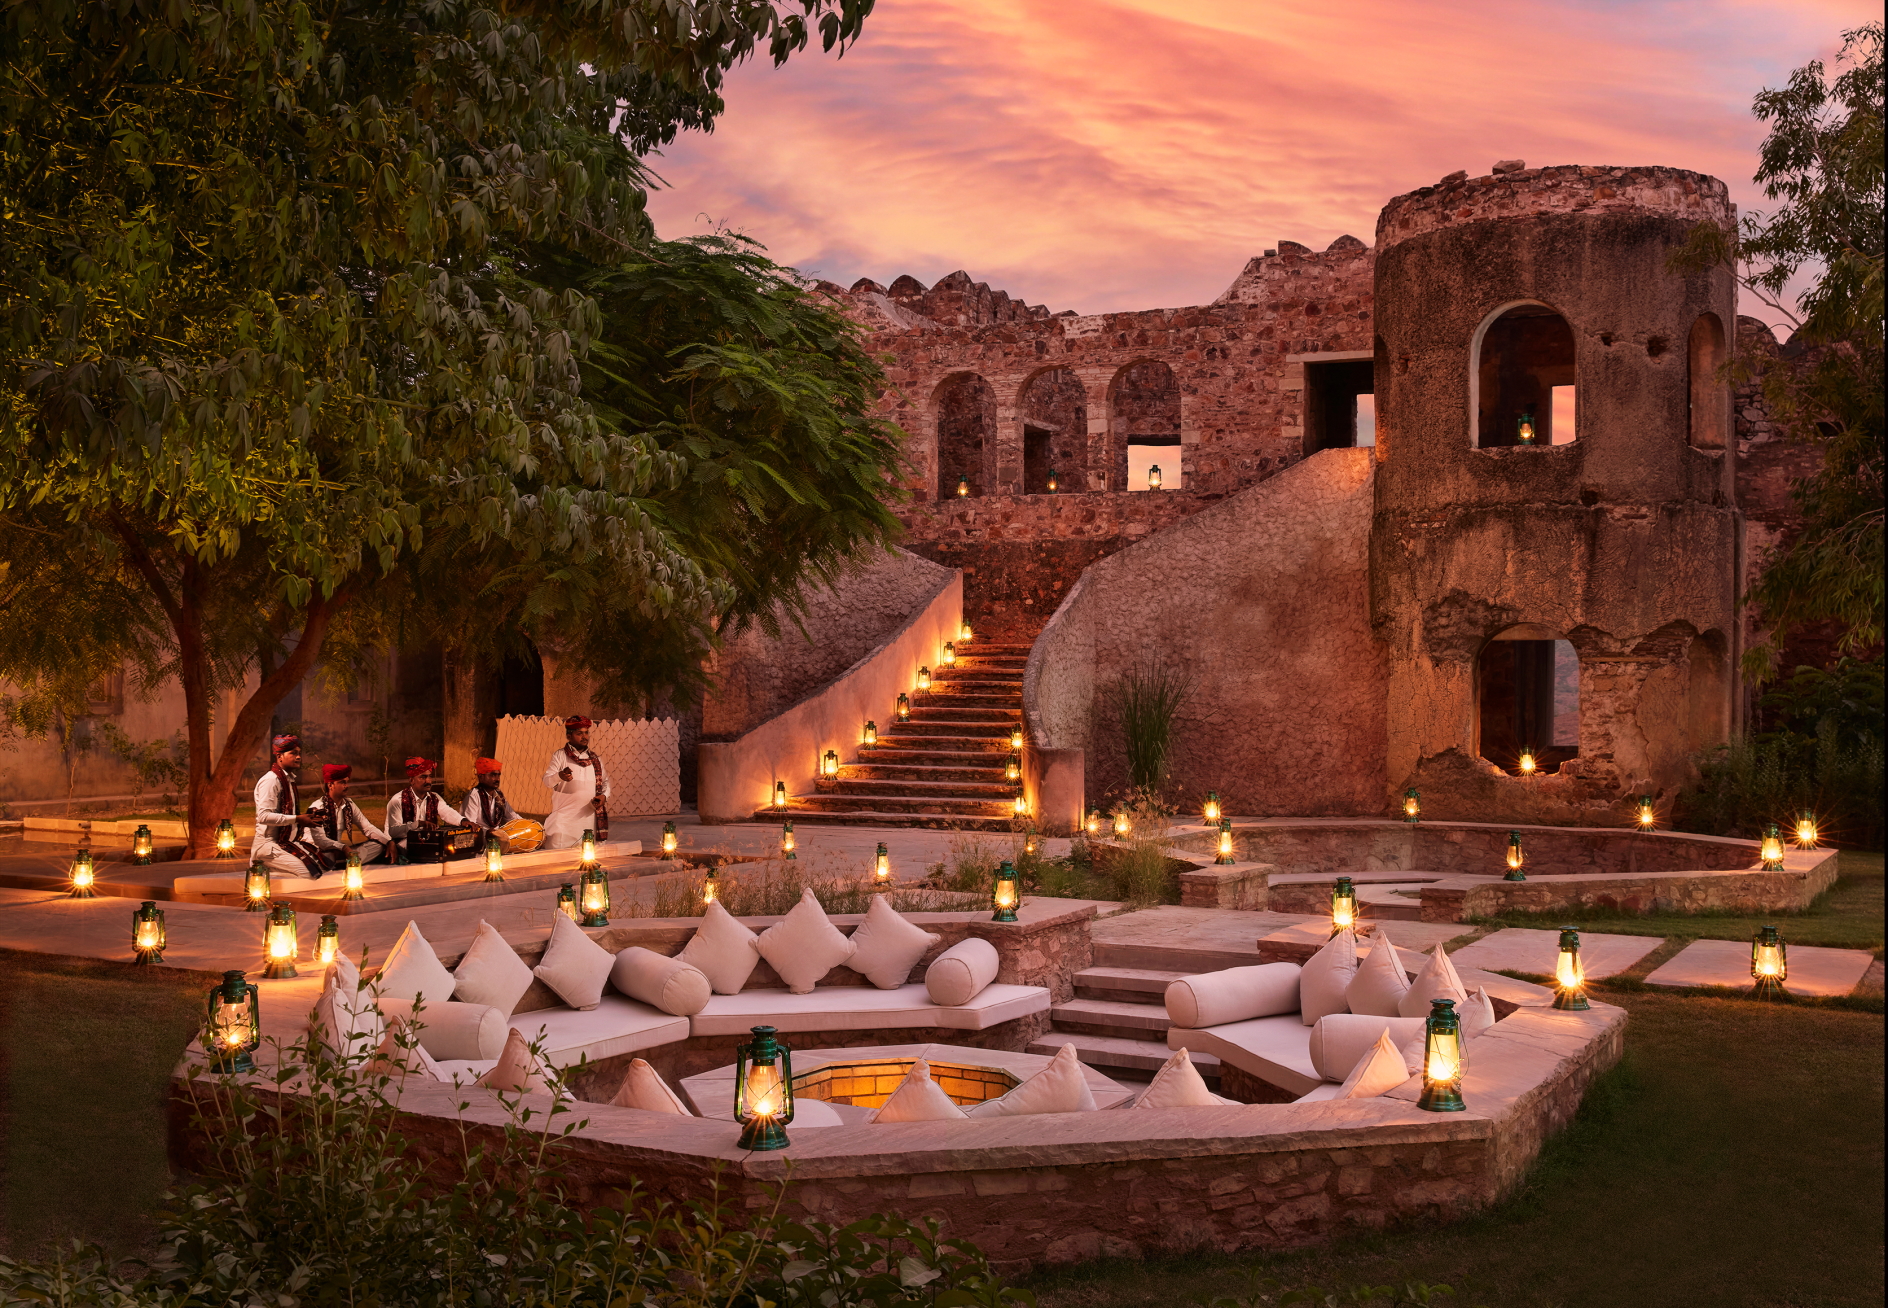 Originally owned by a Rajasthani Royal Family, the Six Senses Fort Barwara incorporates two original palaces and two temples within the walled fort. Click to enlarge.